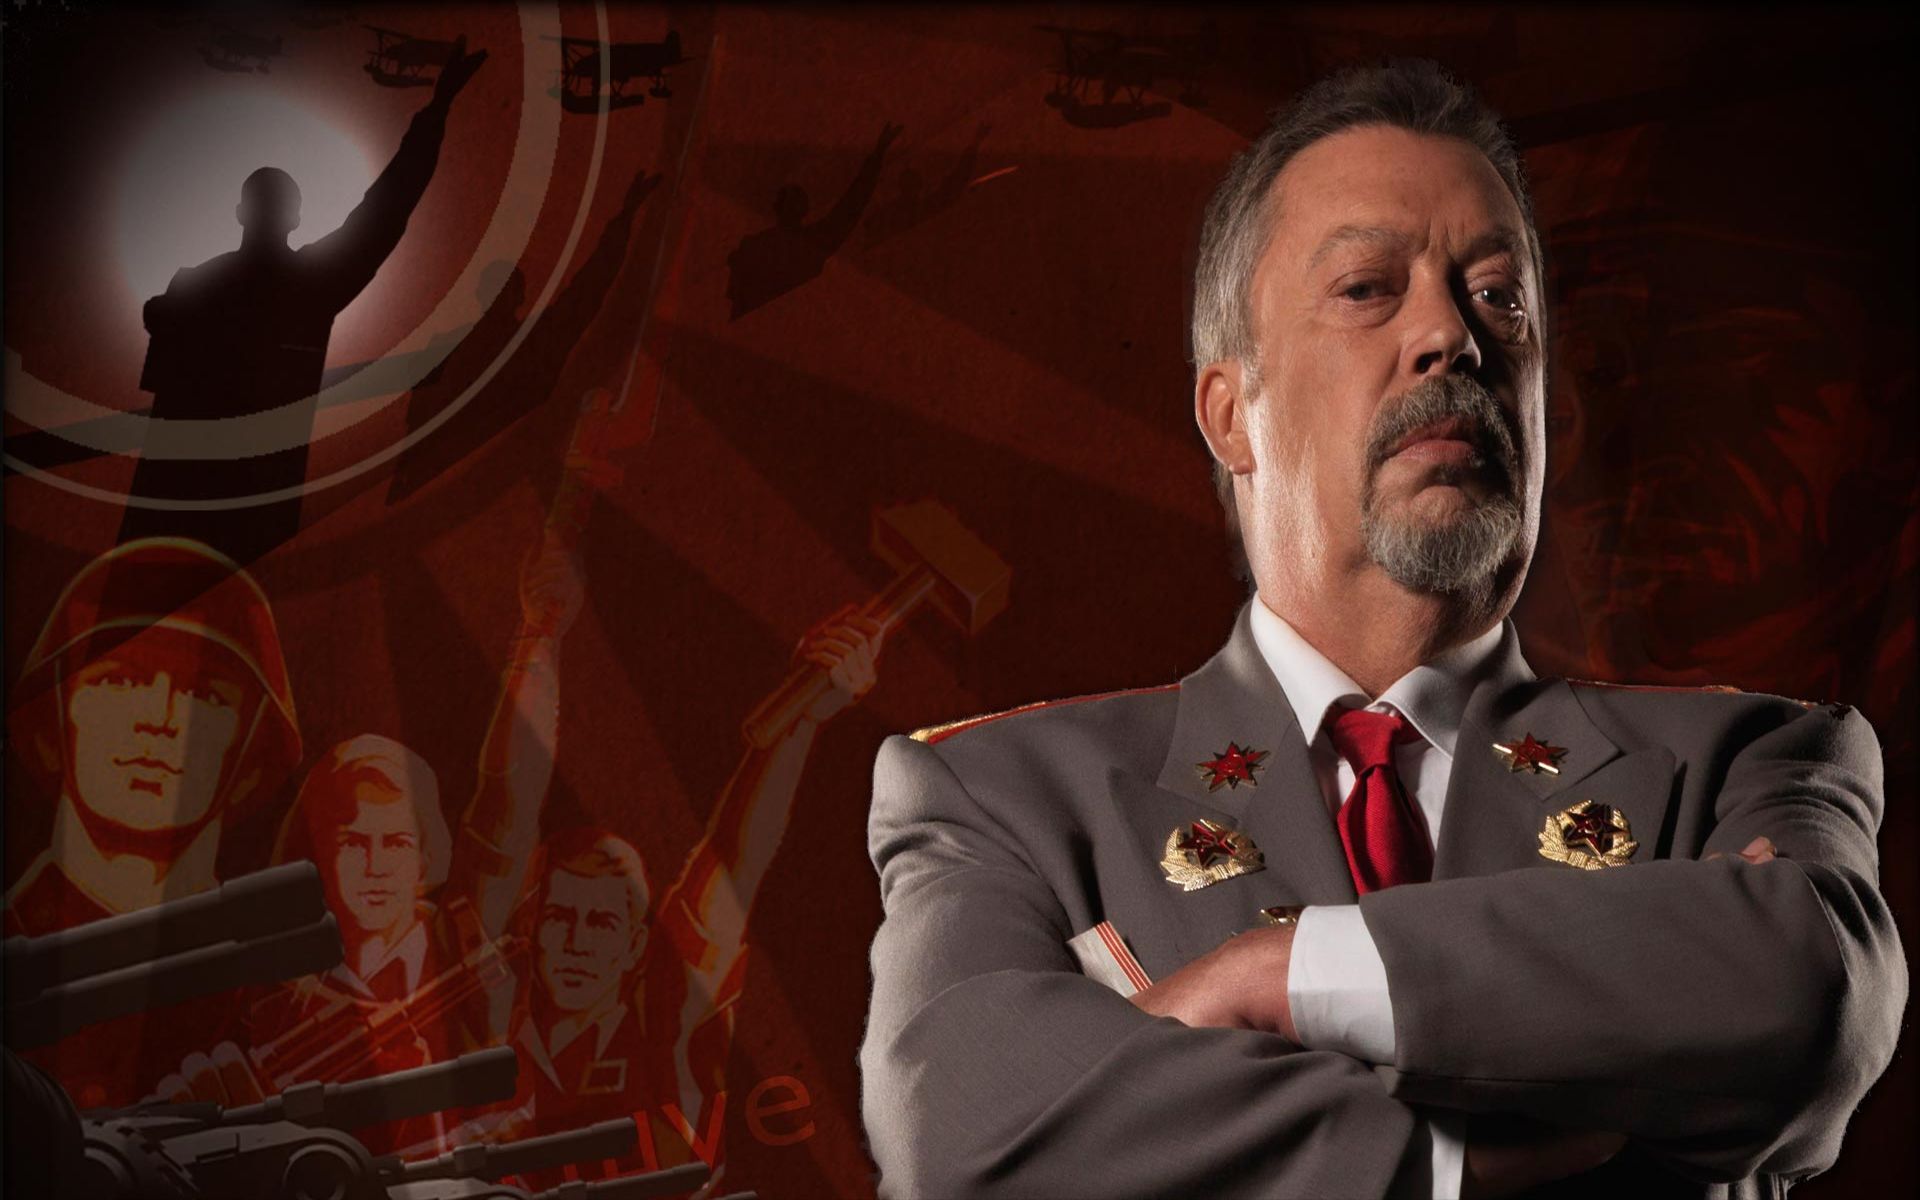 video game, command & conquer: red alert 3, anatoly cherdenko, tim curry, command & conquer